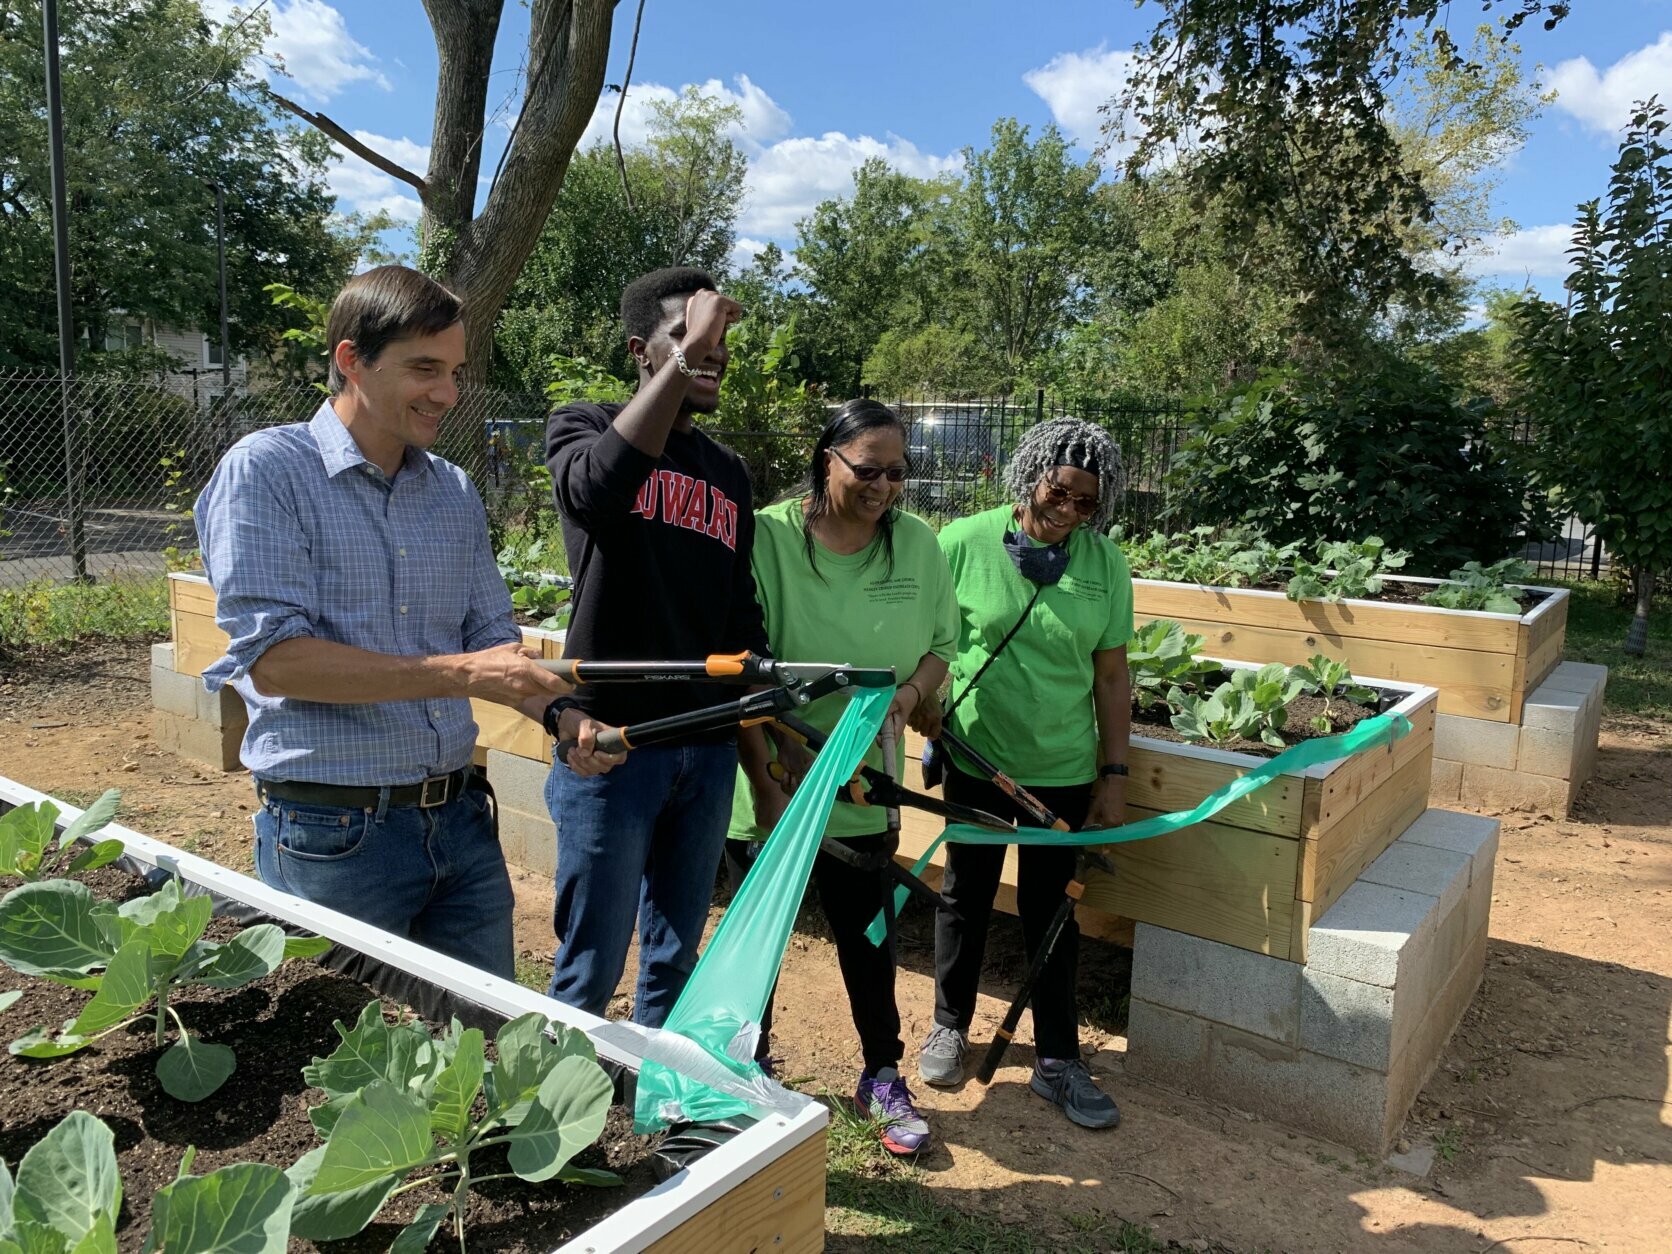 A community comes together to expand an important DC urban garden